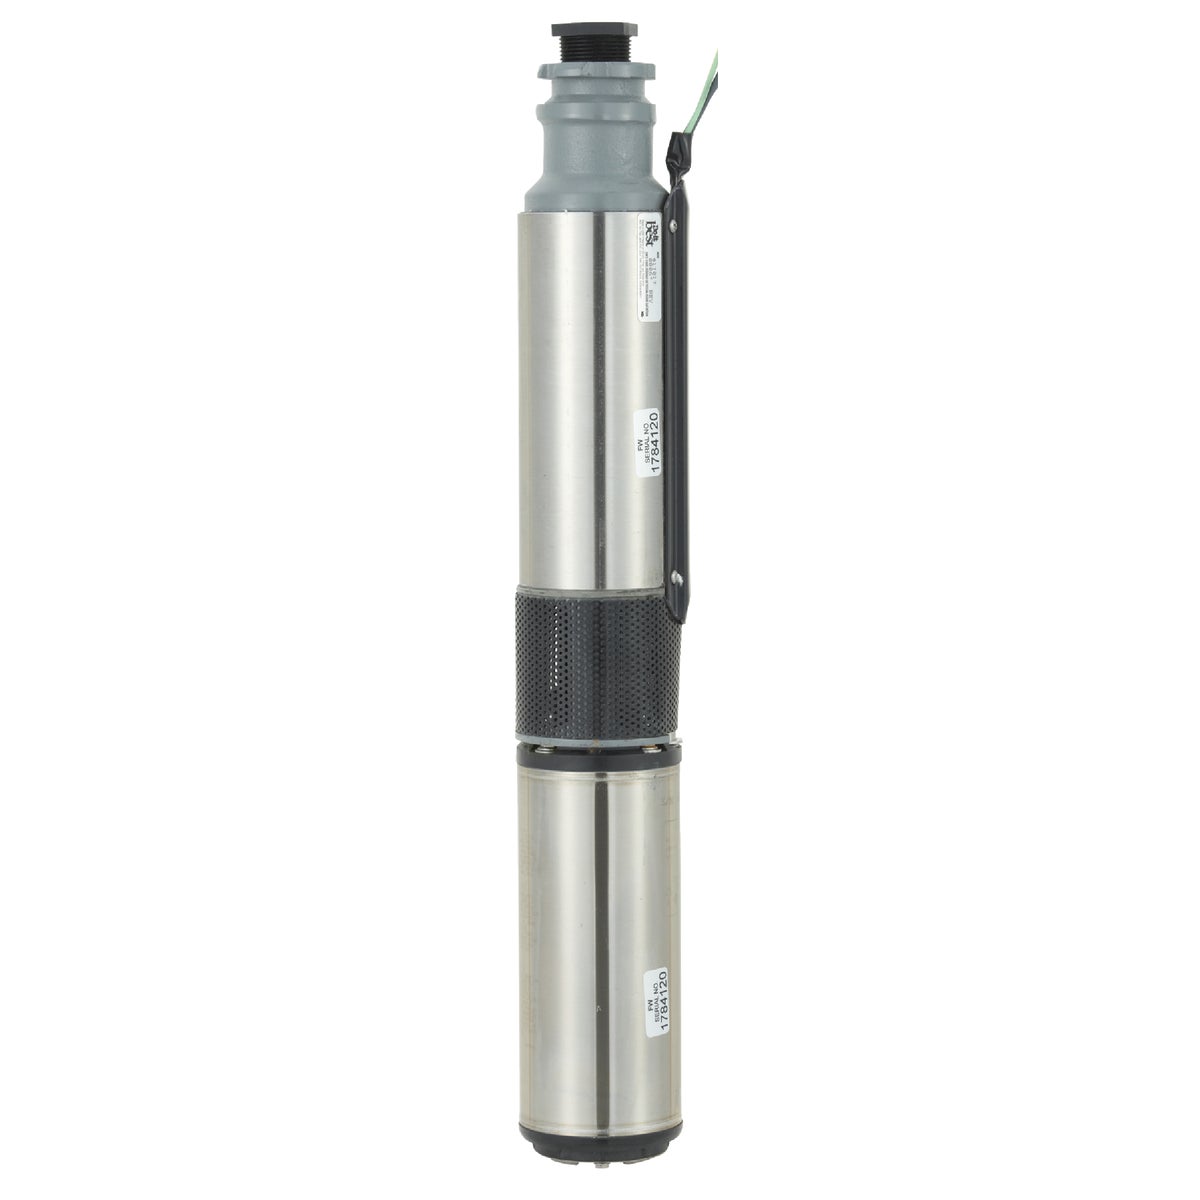 Star Water Systems 4H10A05005 Star Water Systems 1/2 HP Submersible Well Pump, 2W 115V 4H10A05005